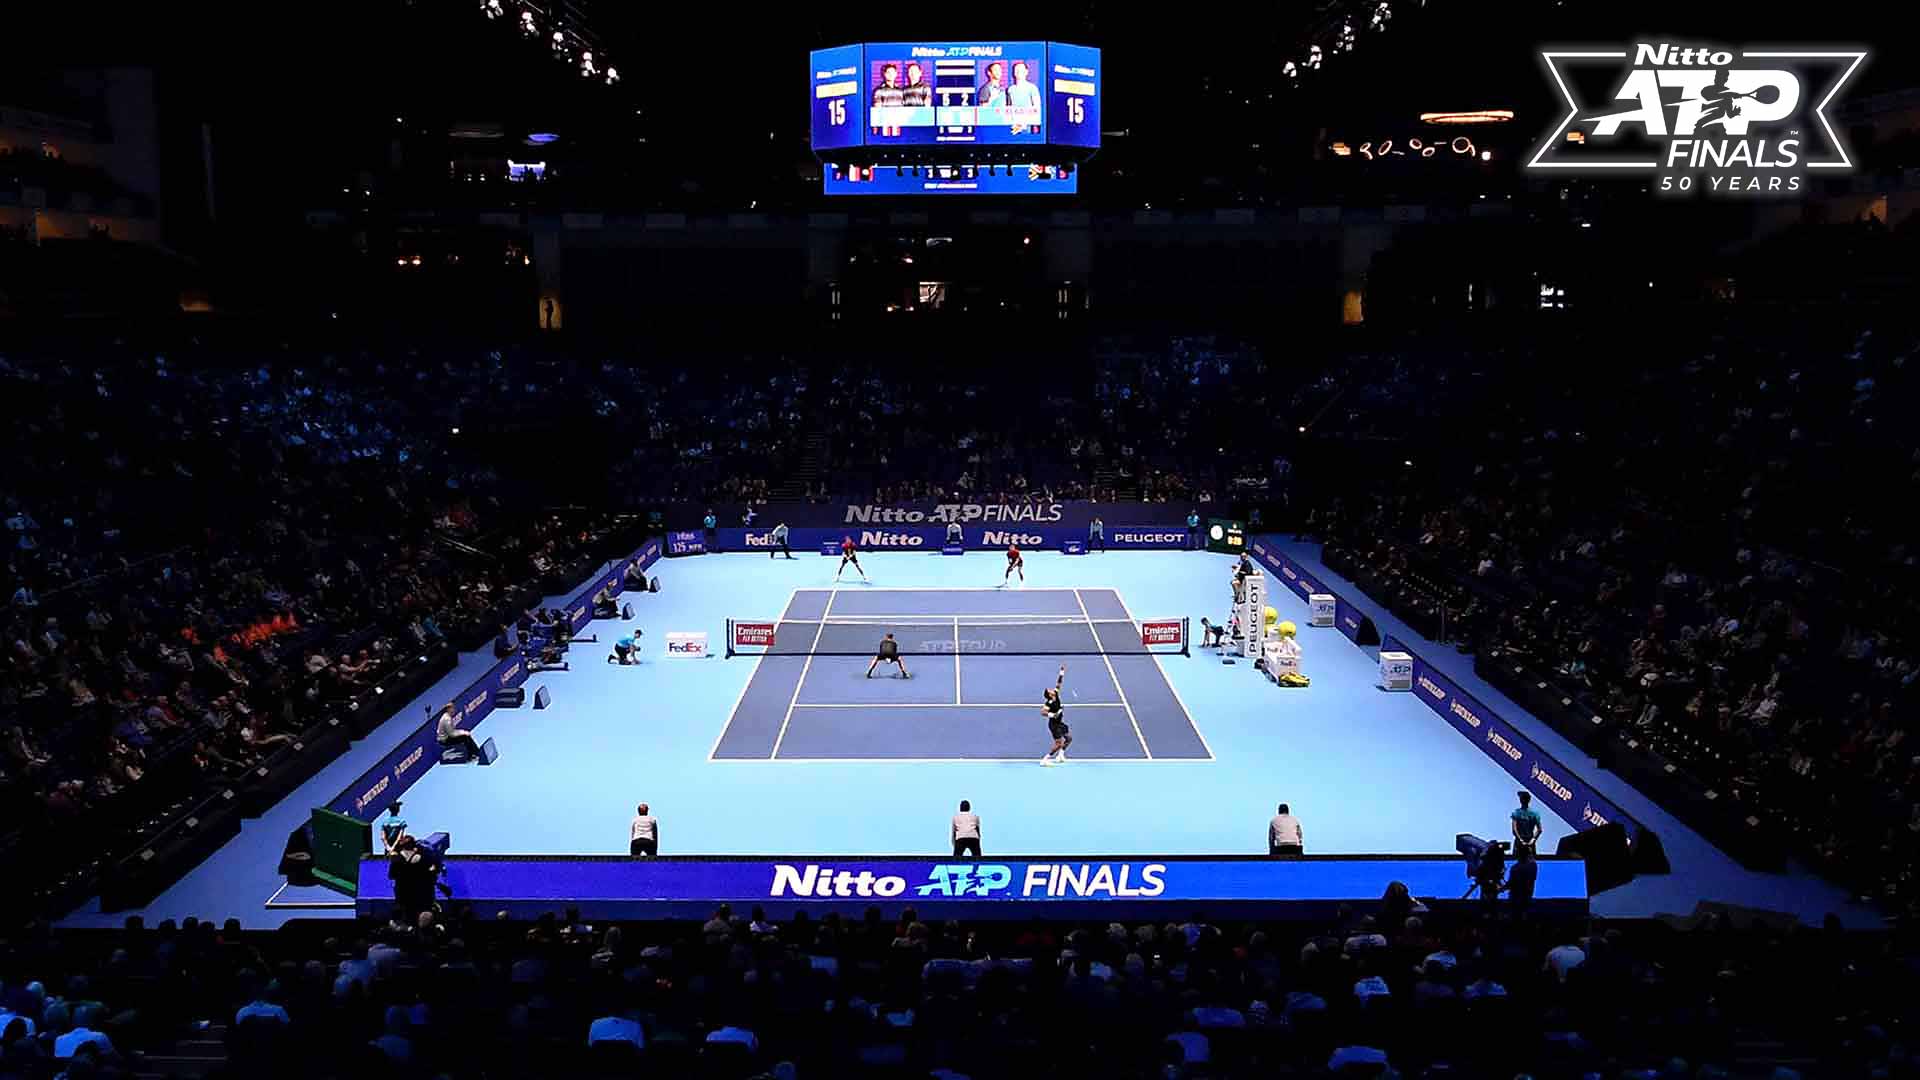 Pierre-Hugues Herbert and Nicolas Mahut won the 2019 Nitto ATP Finals doubles title.